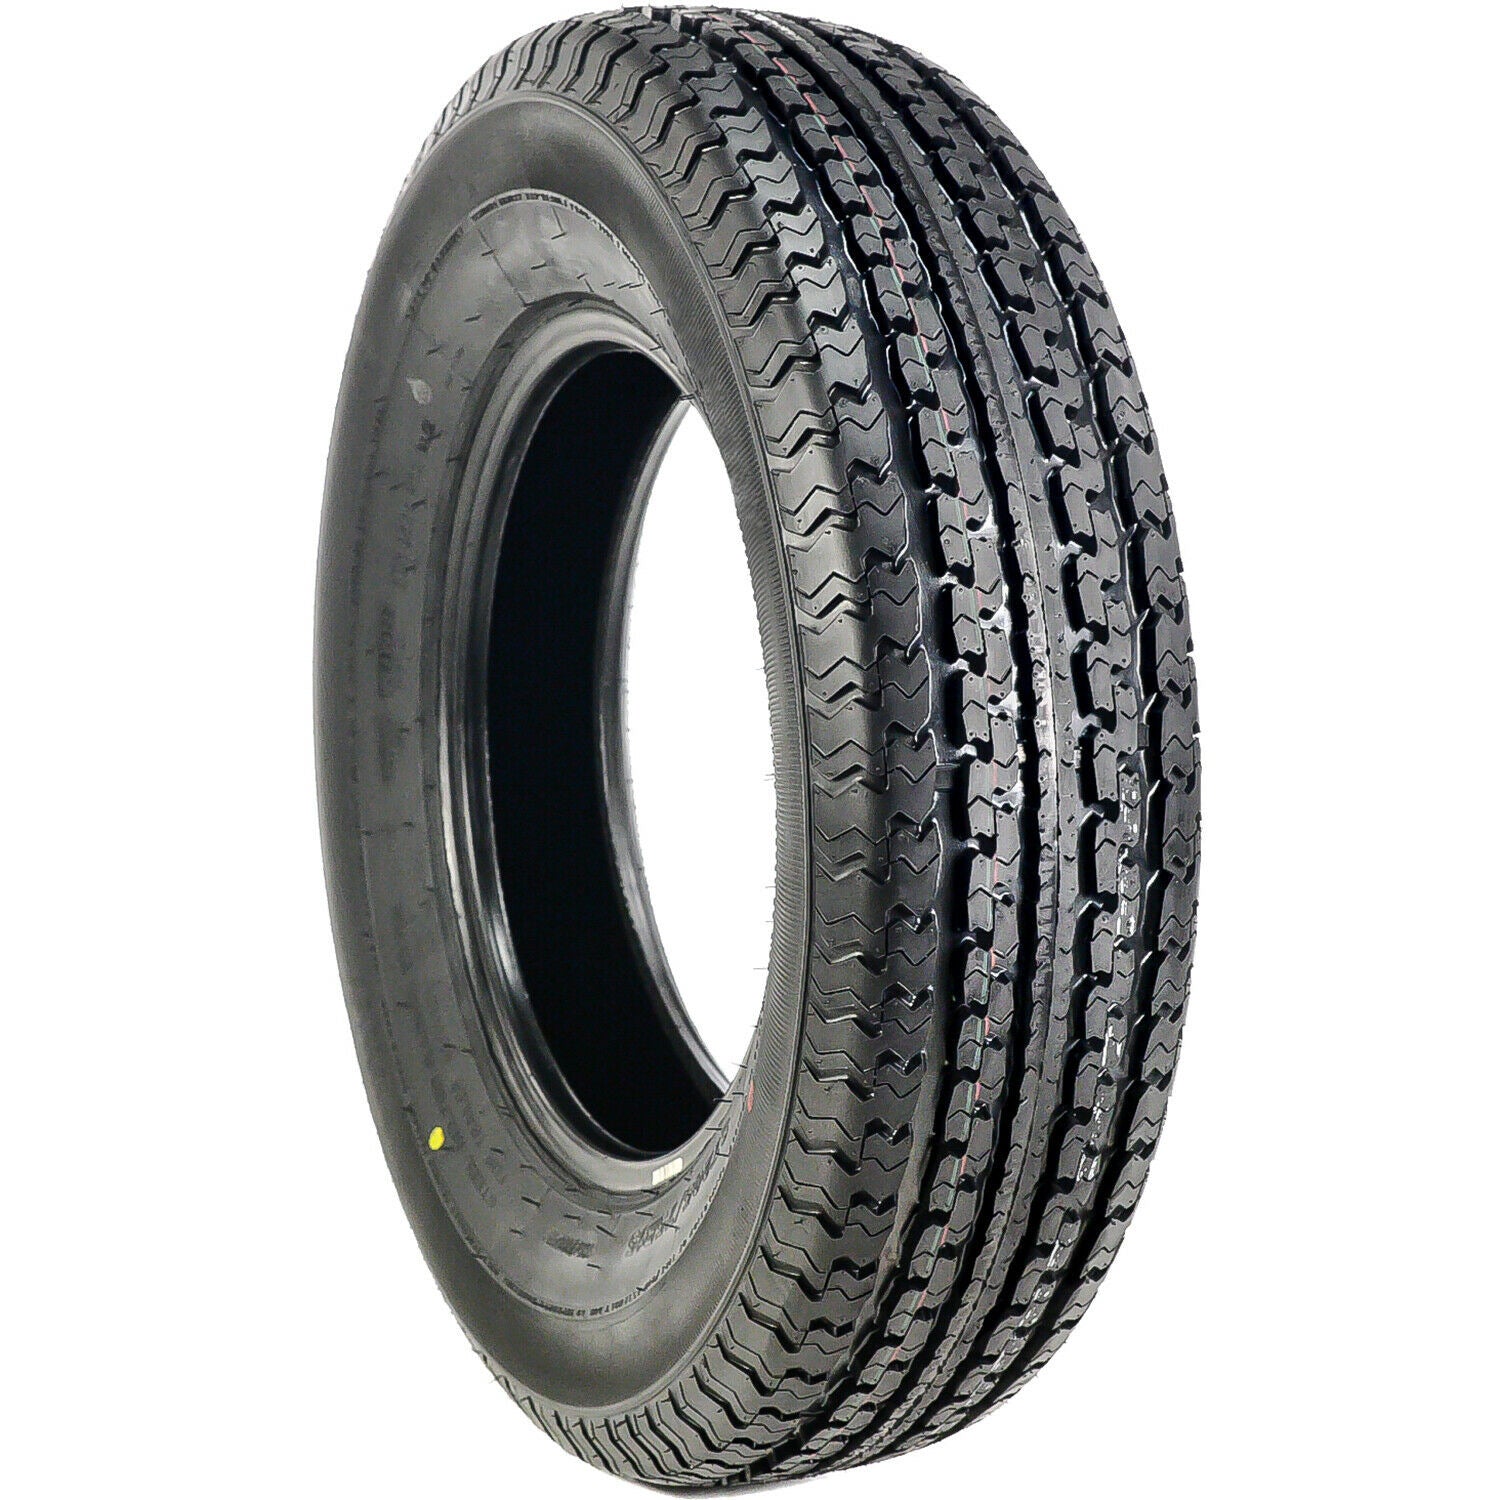 1 Tires Mastertrack UN-203 Steel Belted ST 205/75R15 107/102Q D 8 Ply Trailer